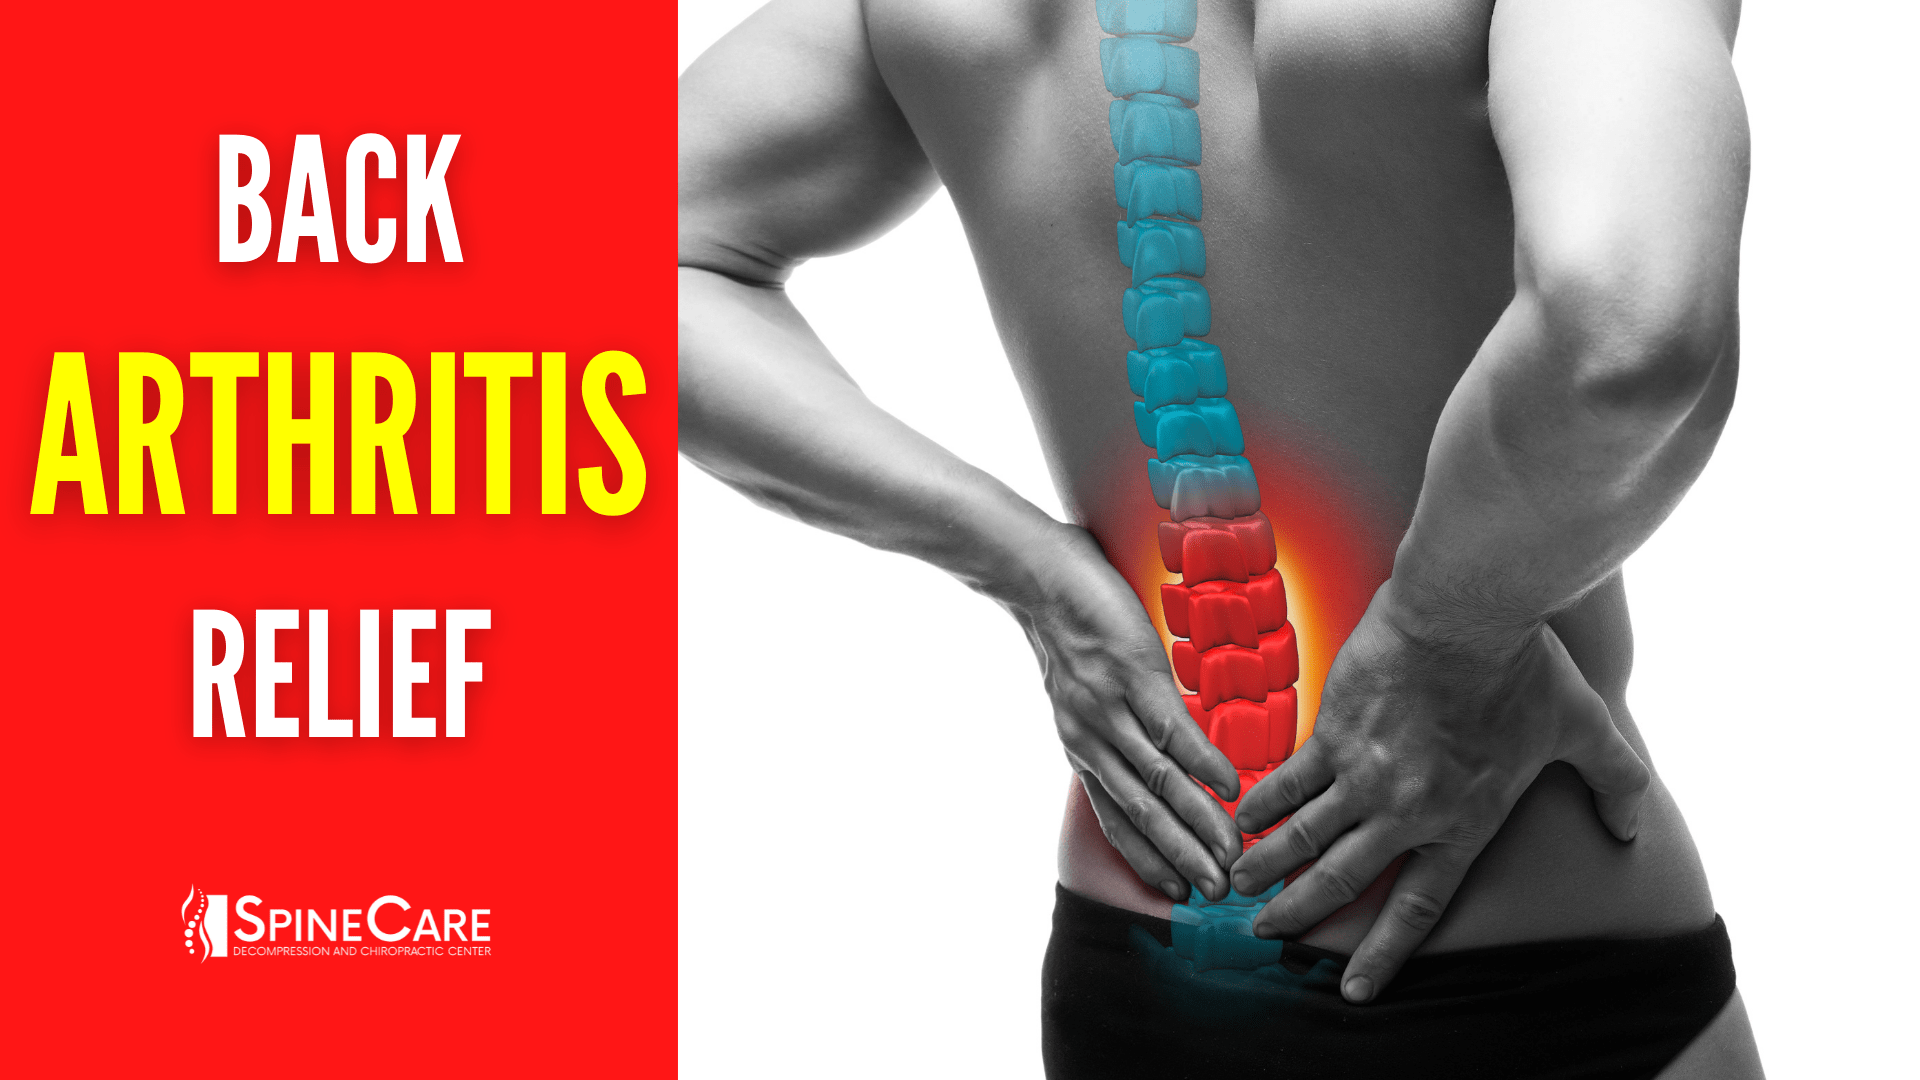 How to Relieve Back Arthritis Pain in 30 SECONDS | SpineCare | St. Joseph, Michigan Chiropractor